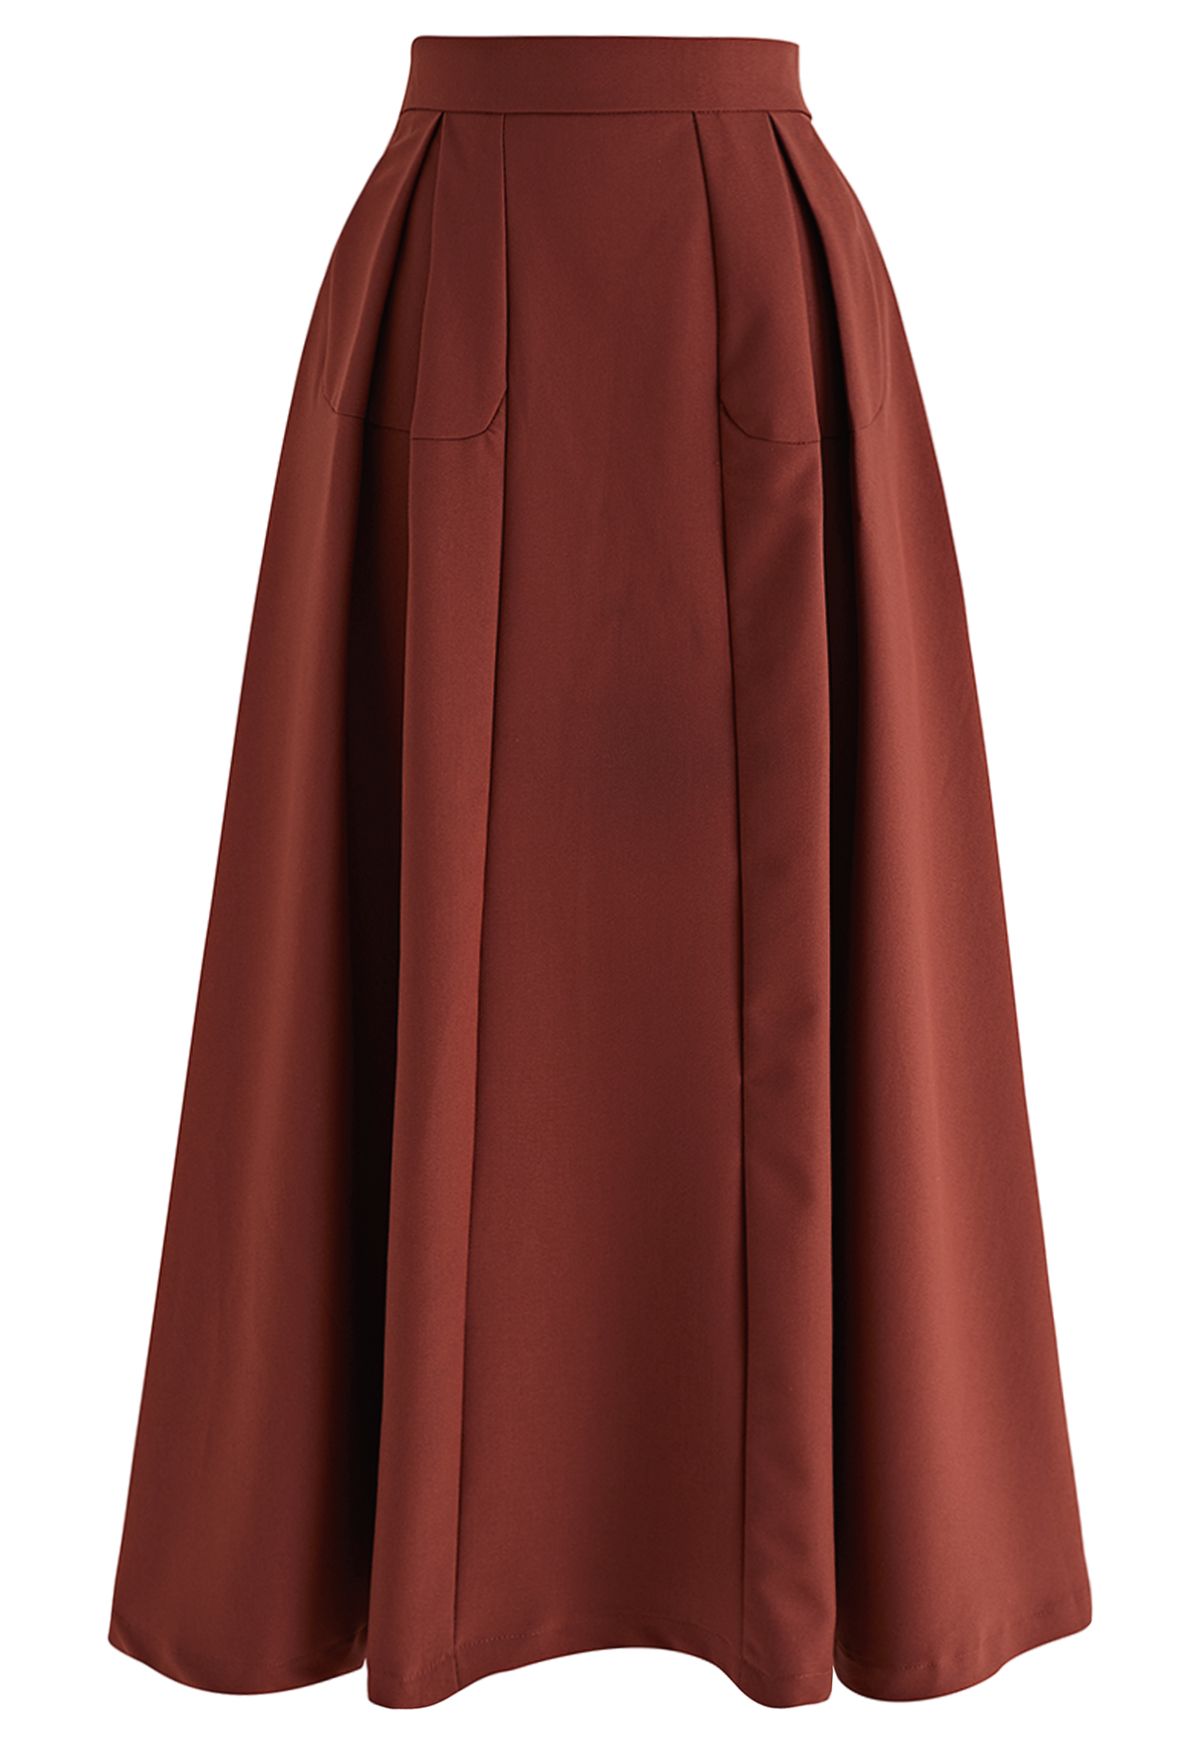 Penelope noot Tegen Seam Detailing Pleated A-Line Skirt in Rust Red - Retro, Indie and Unique  Fashion